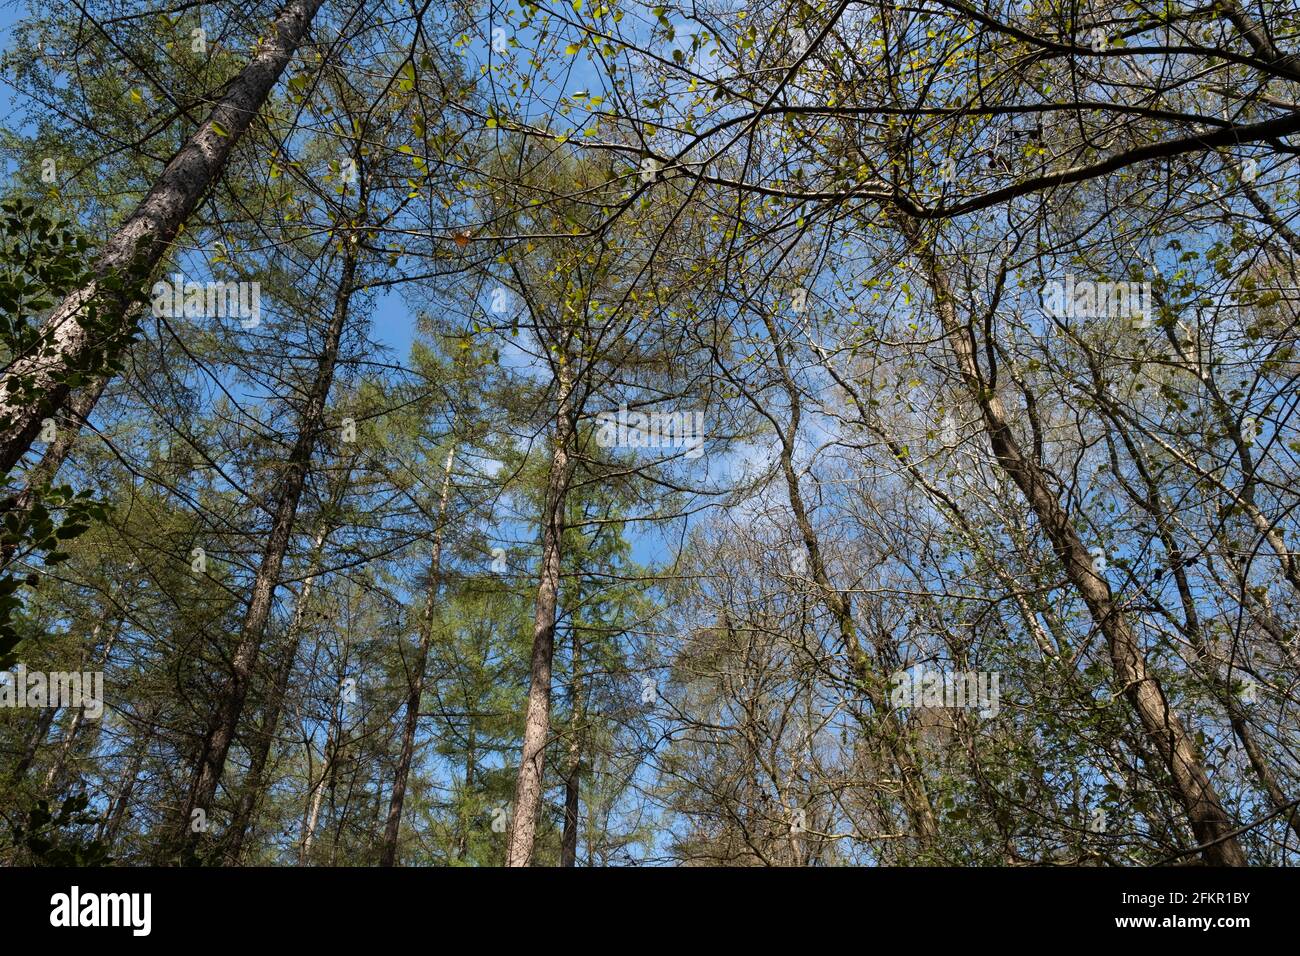 Trees in a forest with budding vibrant green leaves in early spring that converge at the top. Spring photo with blue sky seen from beneath Stock Photo